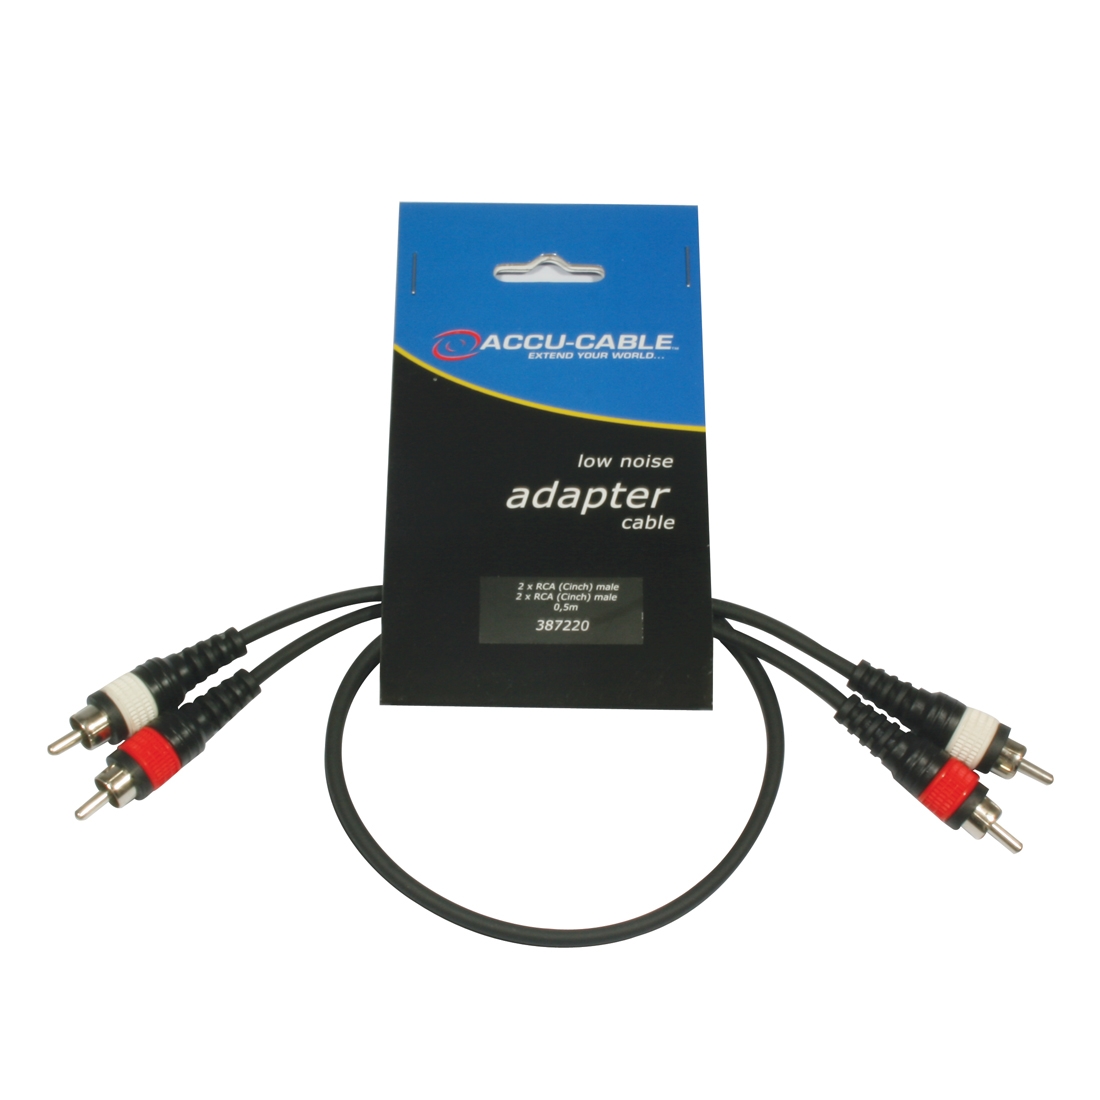 Accu Cable AC-R/0,5